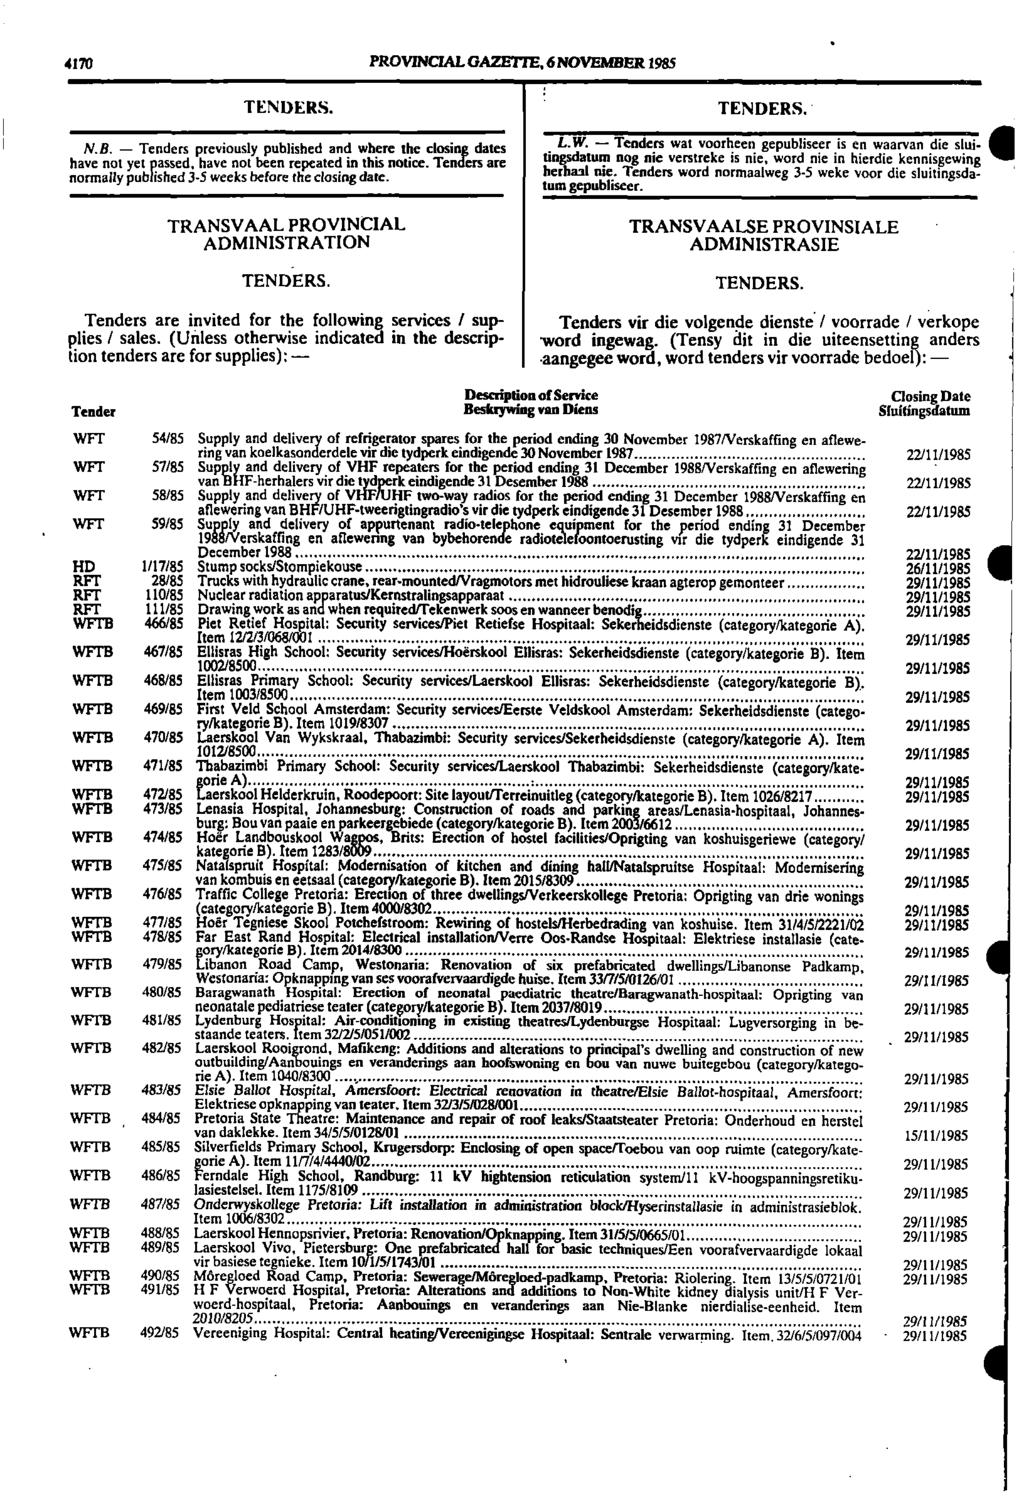 4170 PROVINCIAL GAZETTE, 6 NOVEMBER 1985 TENDERS. N.B. Tenders previously published and where the closing dates have not yet passed, have not been repeated in this notice.